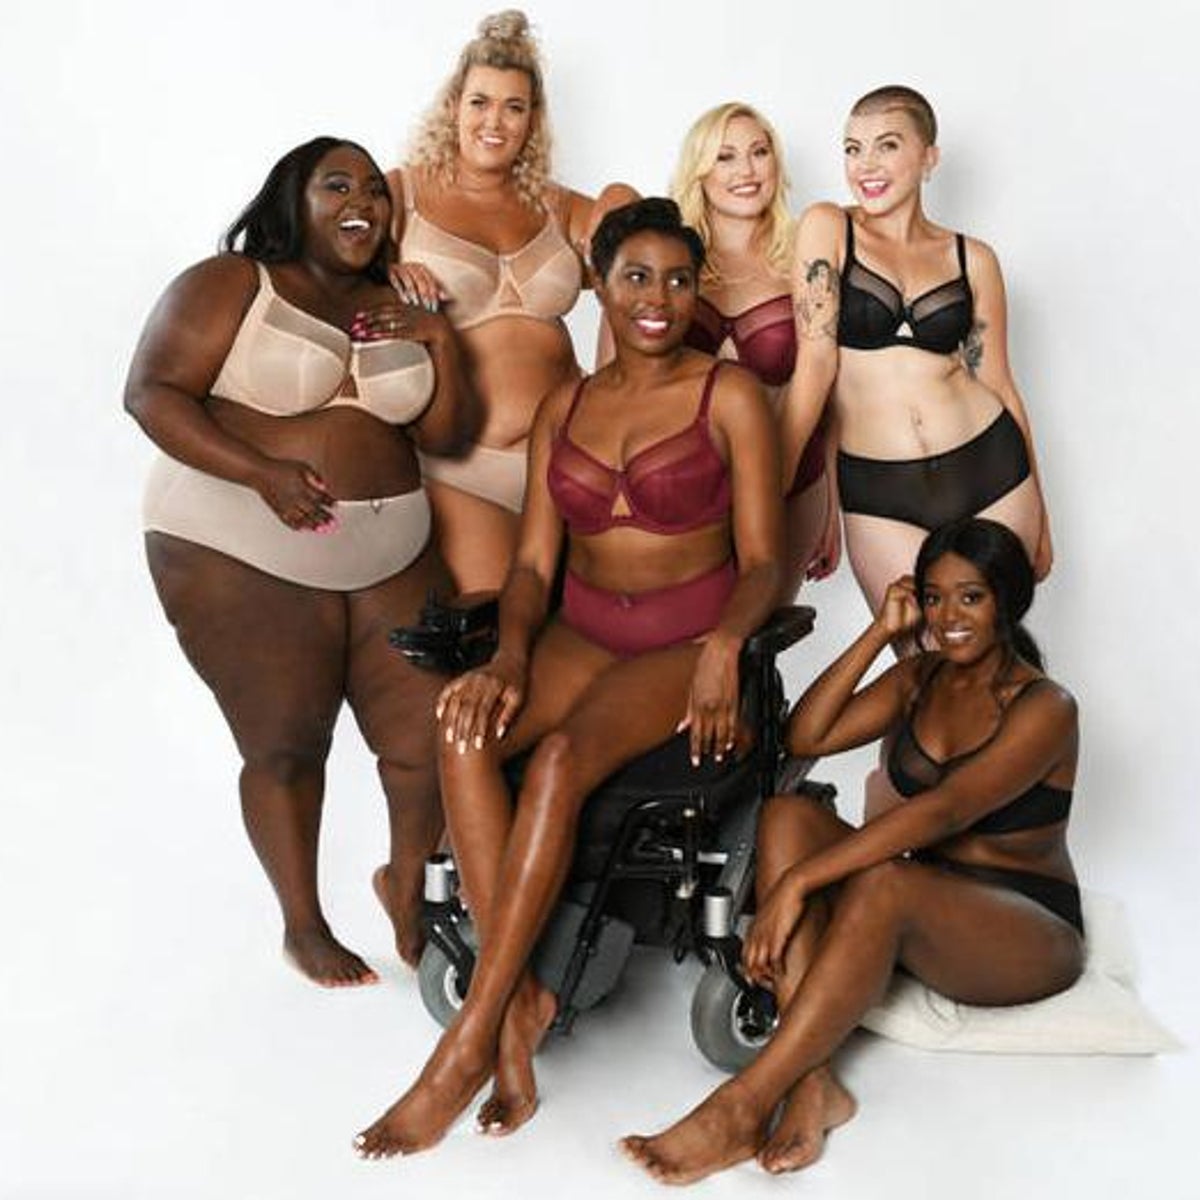 Lingerie brand Curvy Kate celebrates body positivity with all